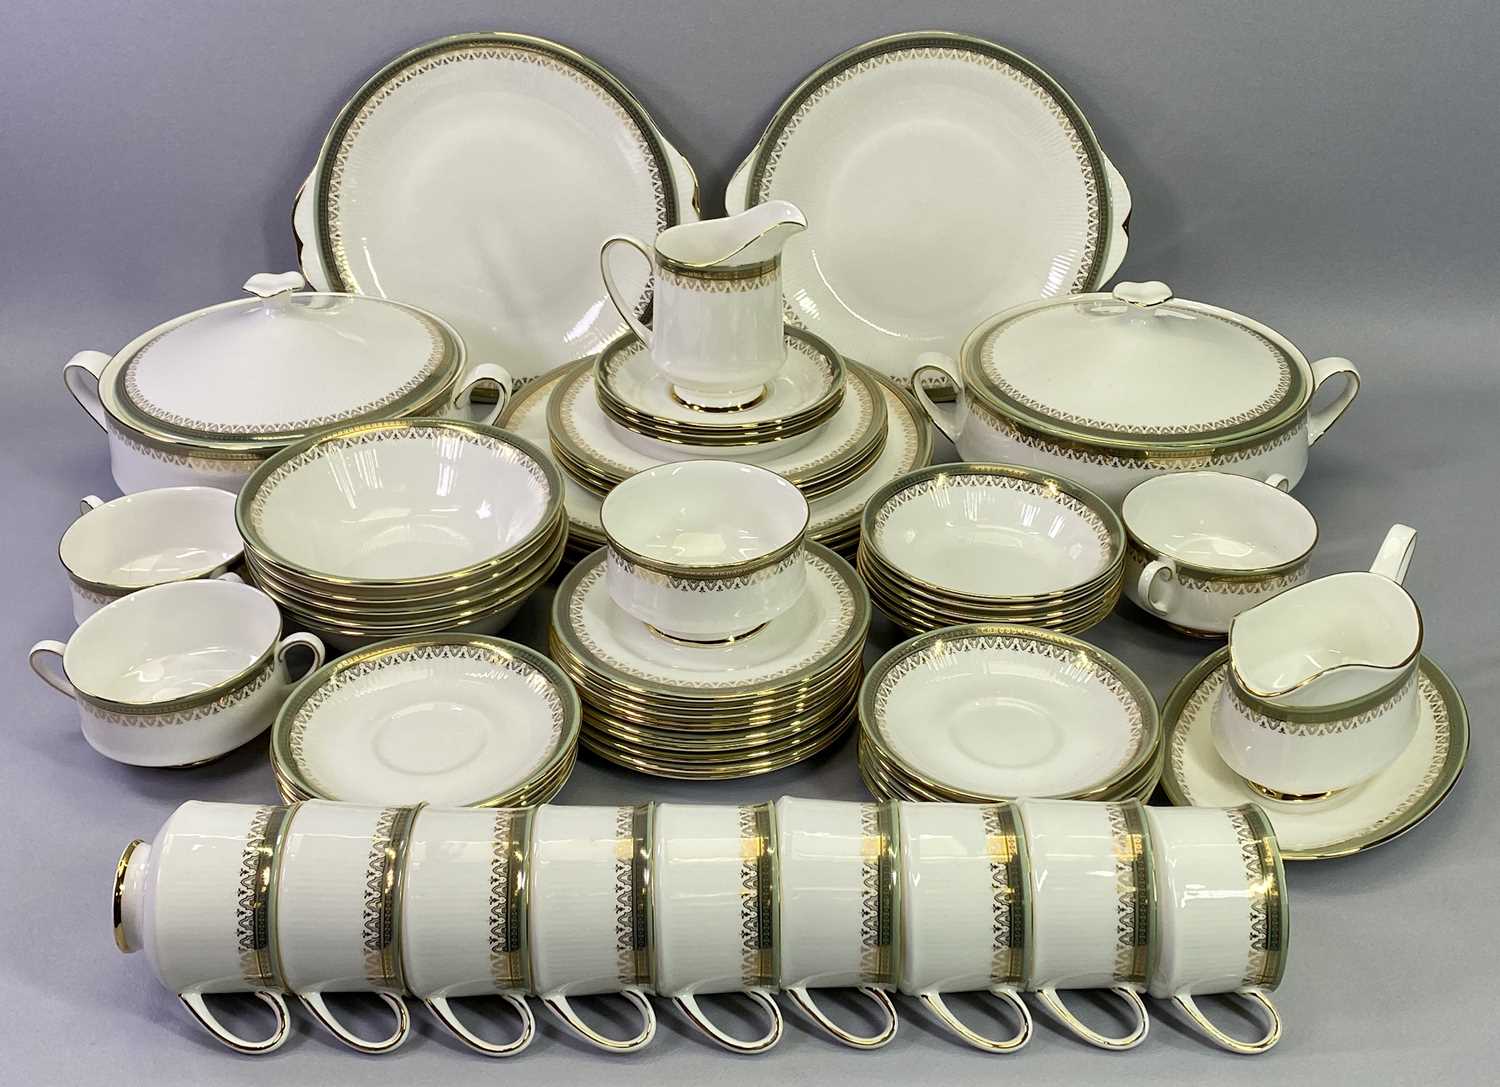 PARAGON KENSINGTON TEA & DINNERWARE, 62 PIECES - consist of two vegetable tureens with covers, gravy